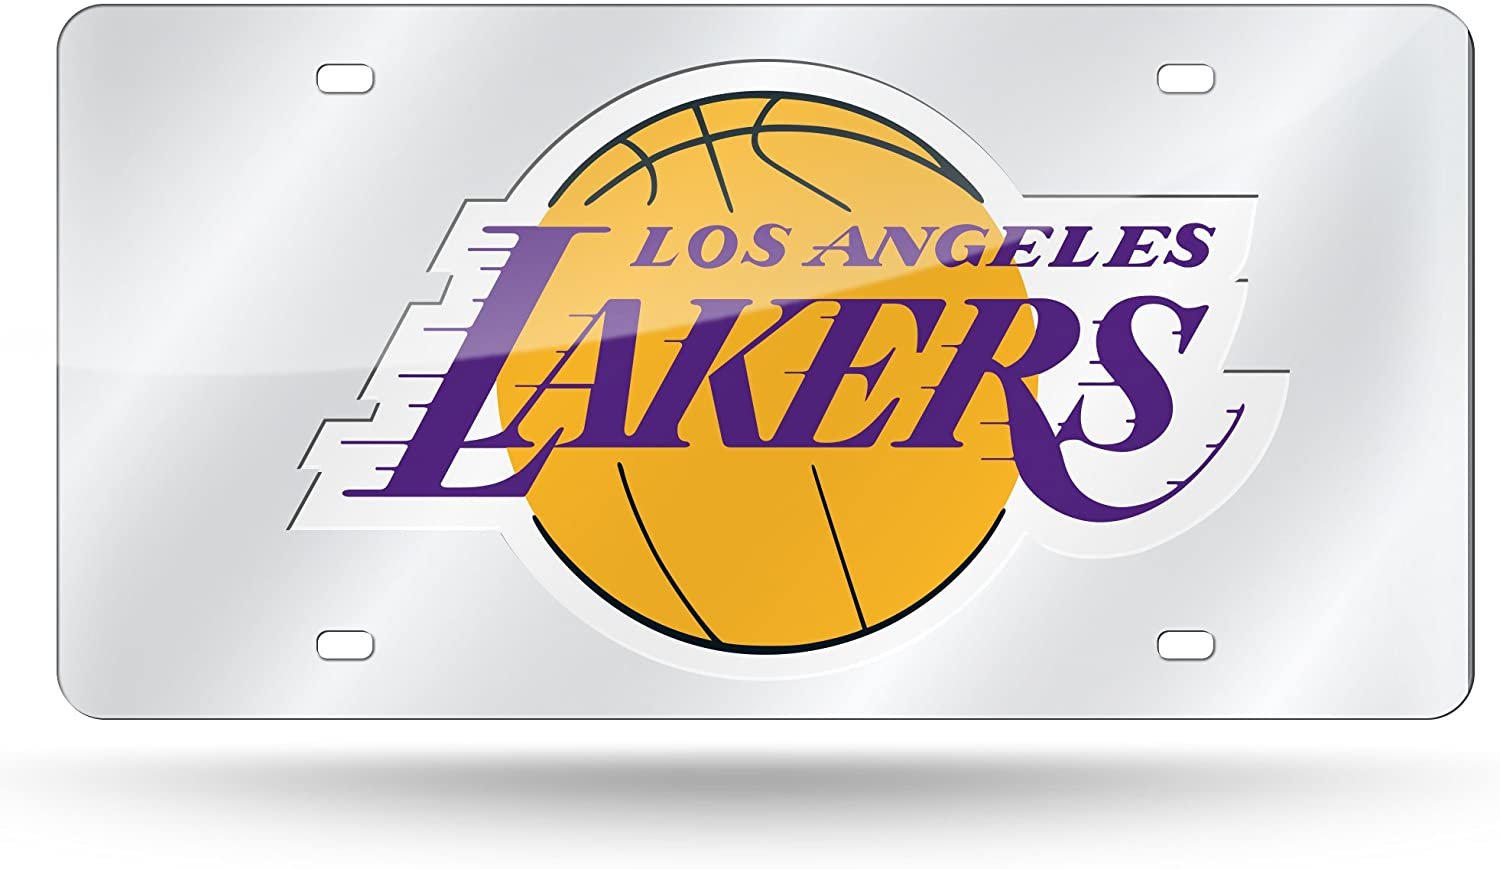 Los Angeles Lakers Premium Laser Cut Tag License Plate, Mirrored Acrylic Inlaid, 12x6 Inch